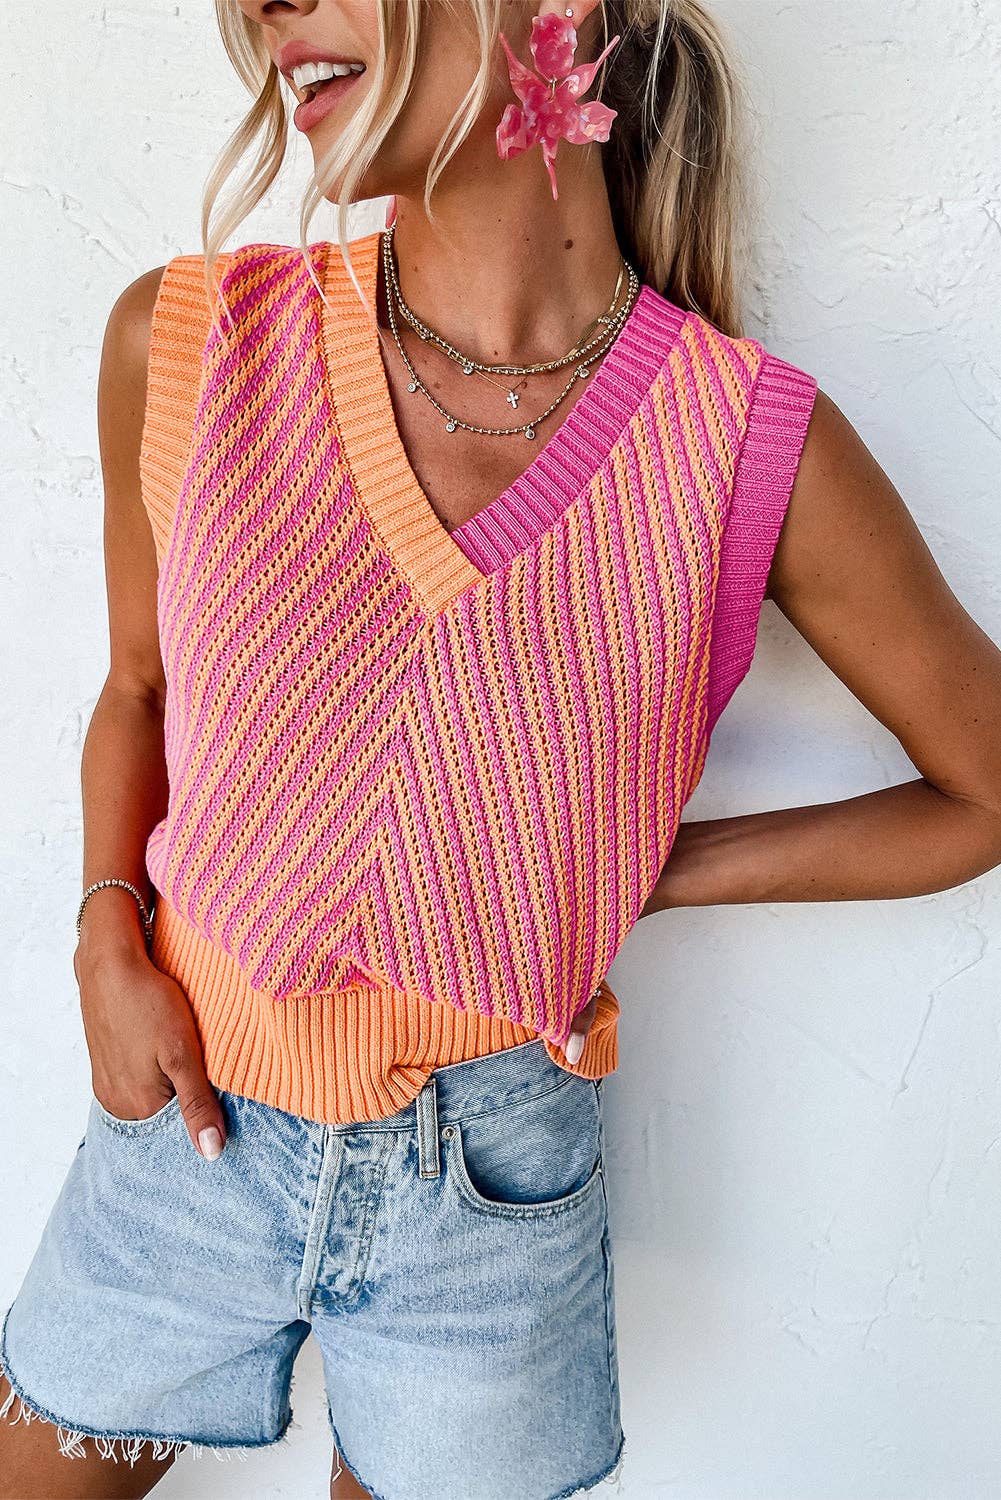 Strawberry Pink Contrast Chevron Knit Sweater Top